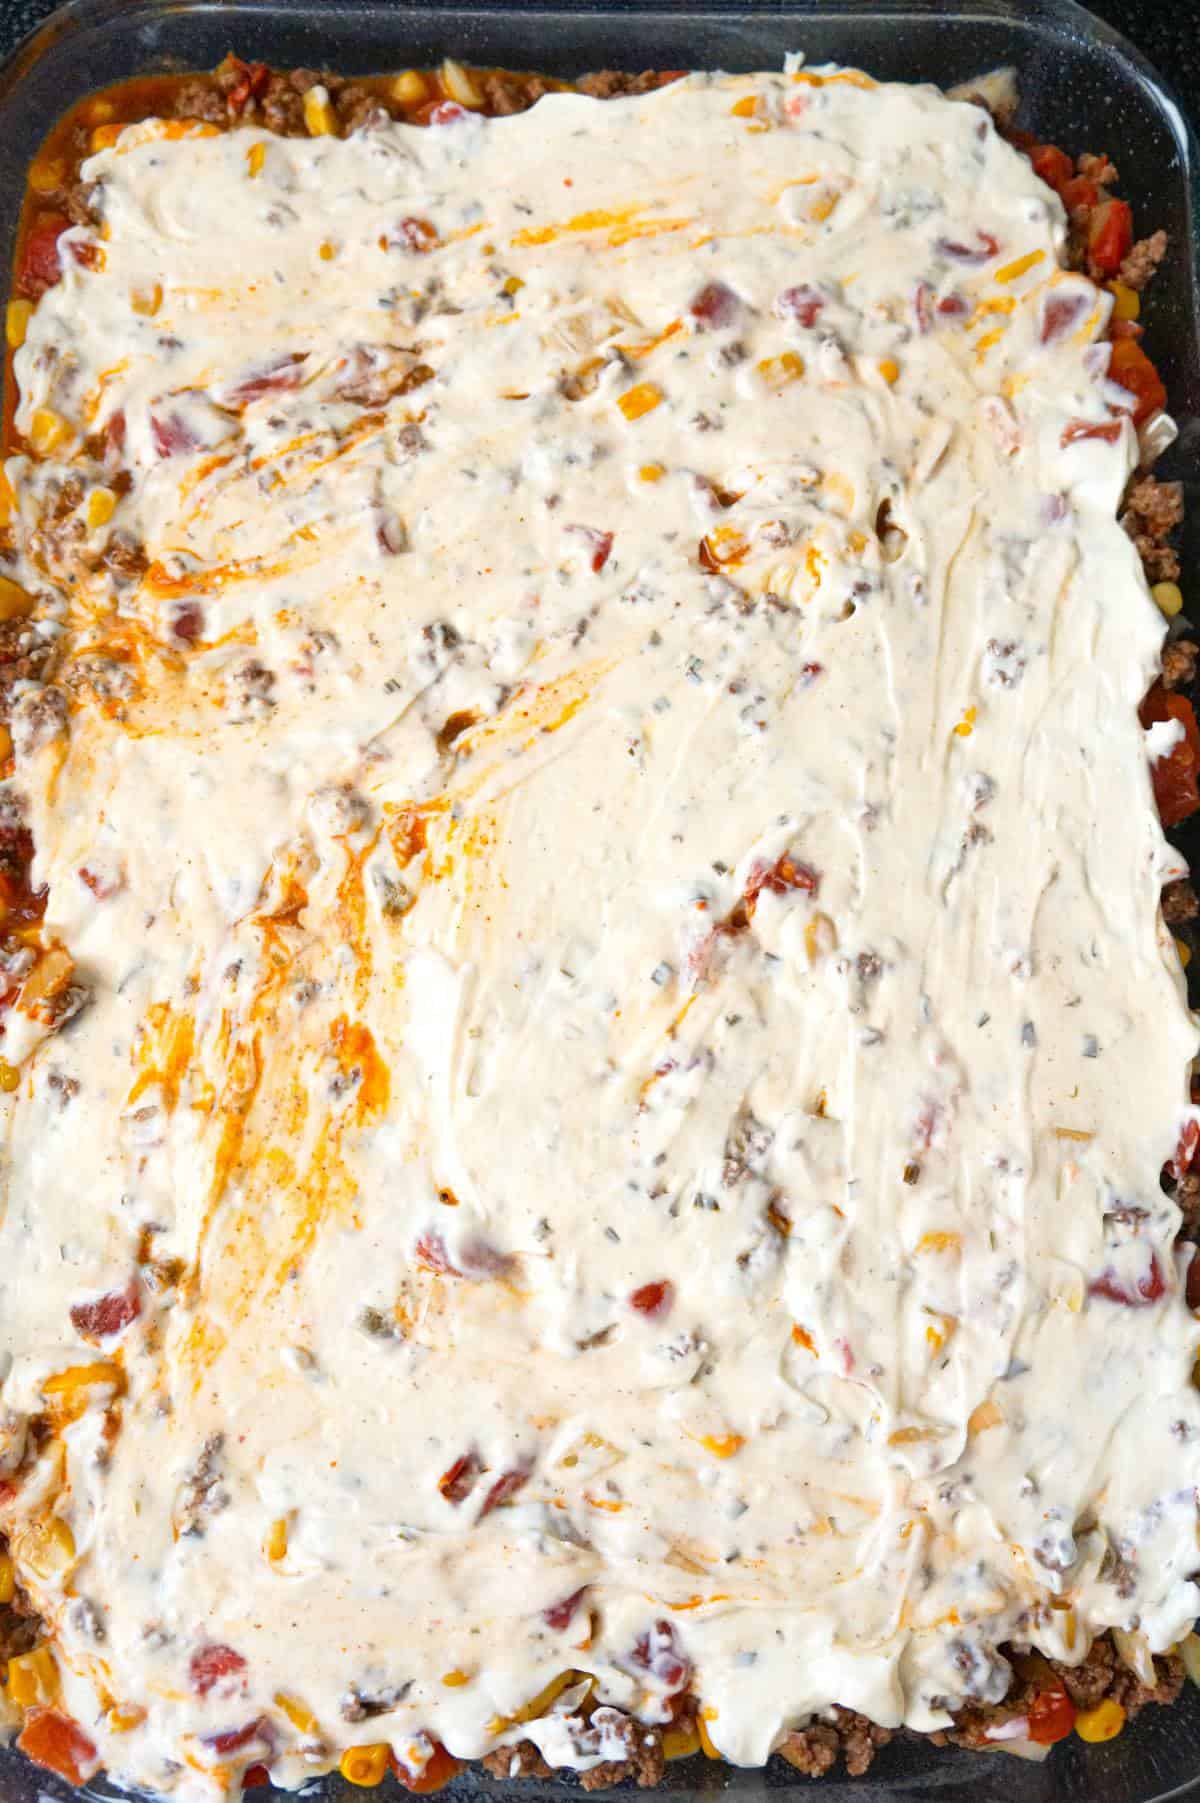 cream cheese and mayo mixture spread on top of ground beef and biscuit casserole